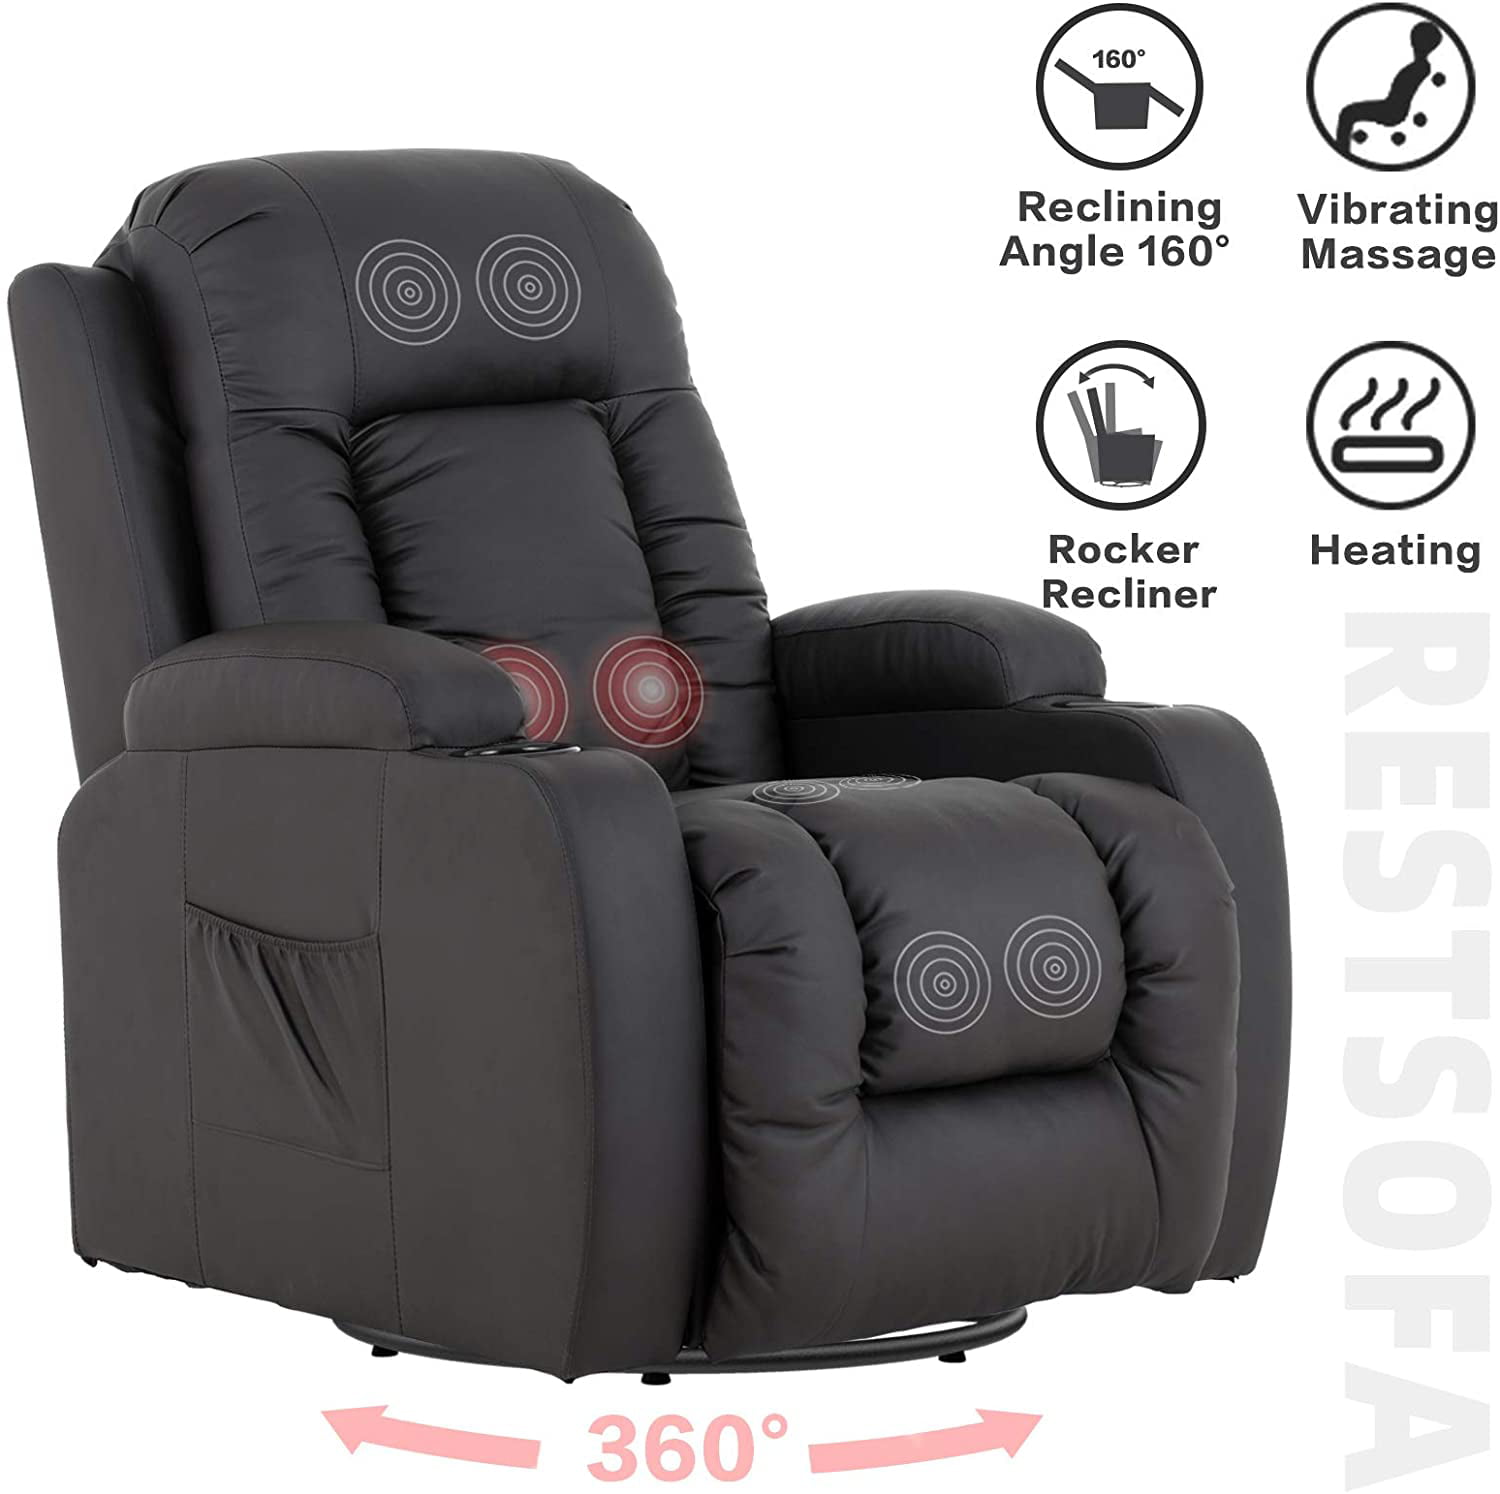 Mecor Massage Recliner Chair Pu Leather, Leather Rocker Recliner Chairs